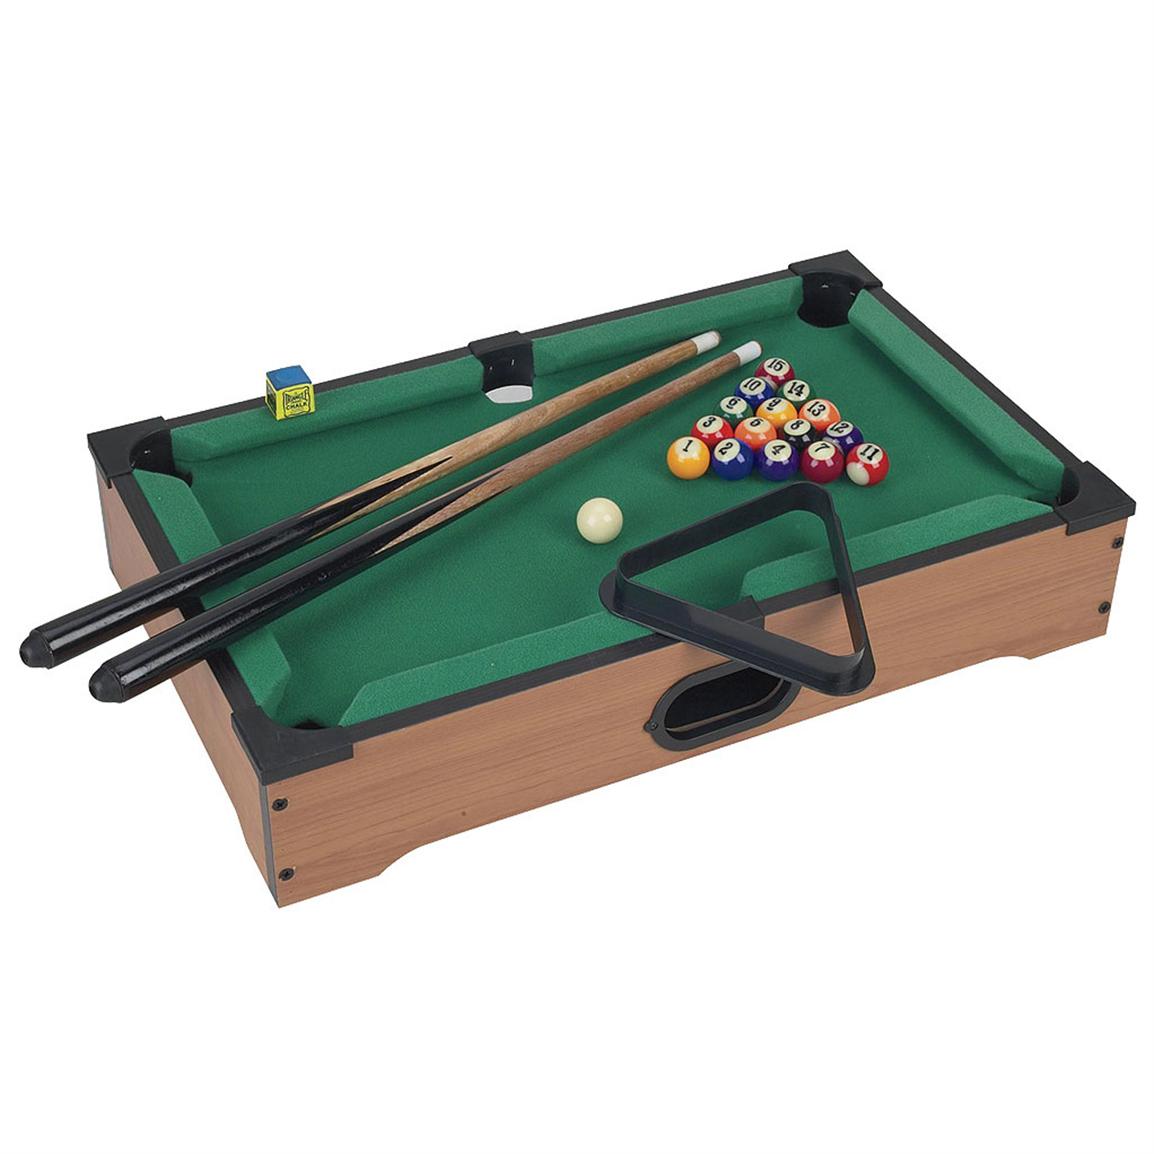 Trademark Games™ Mini Table Top Pool Table With Accessories  232473 